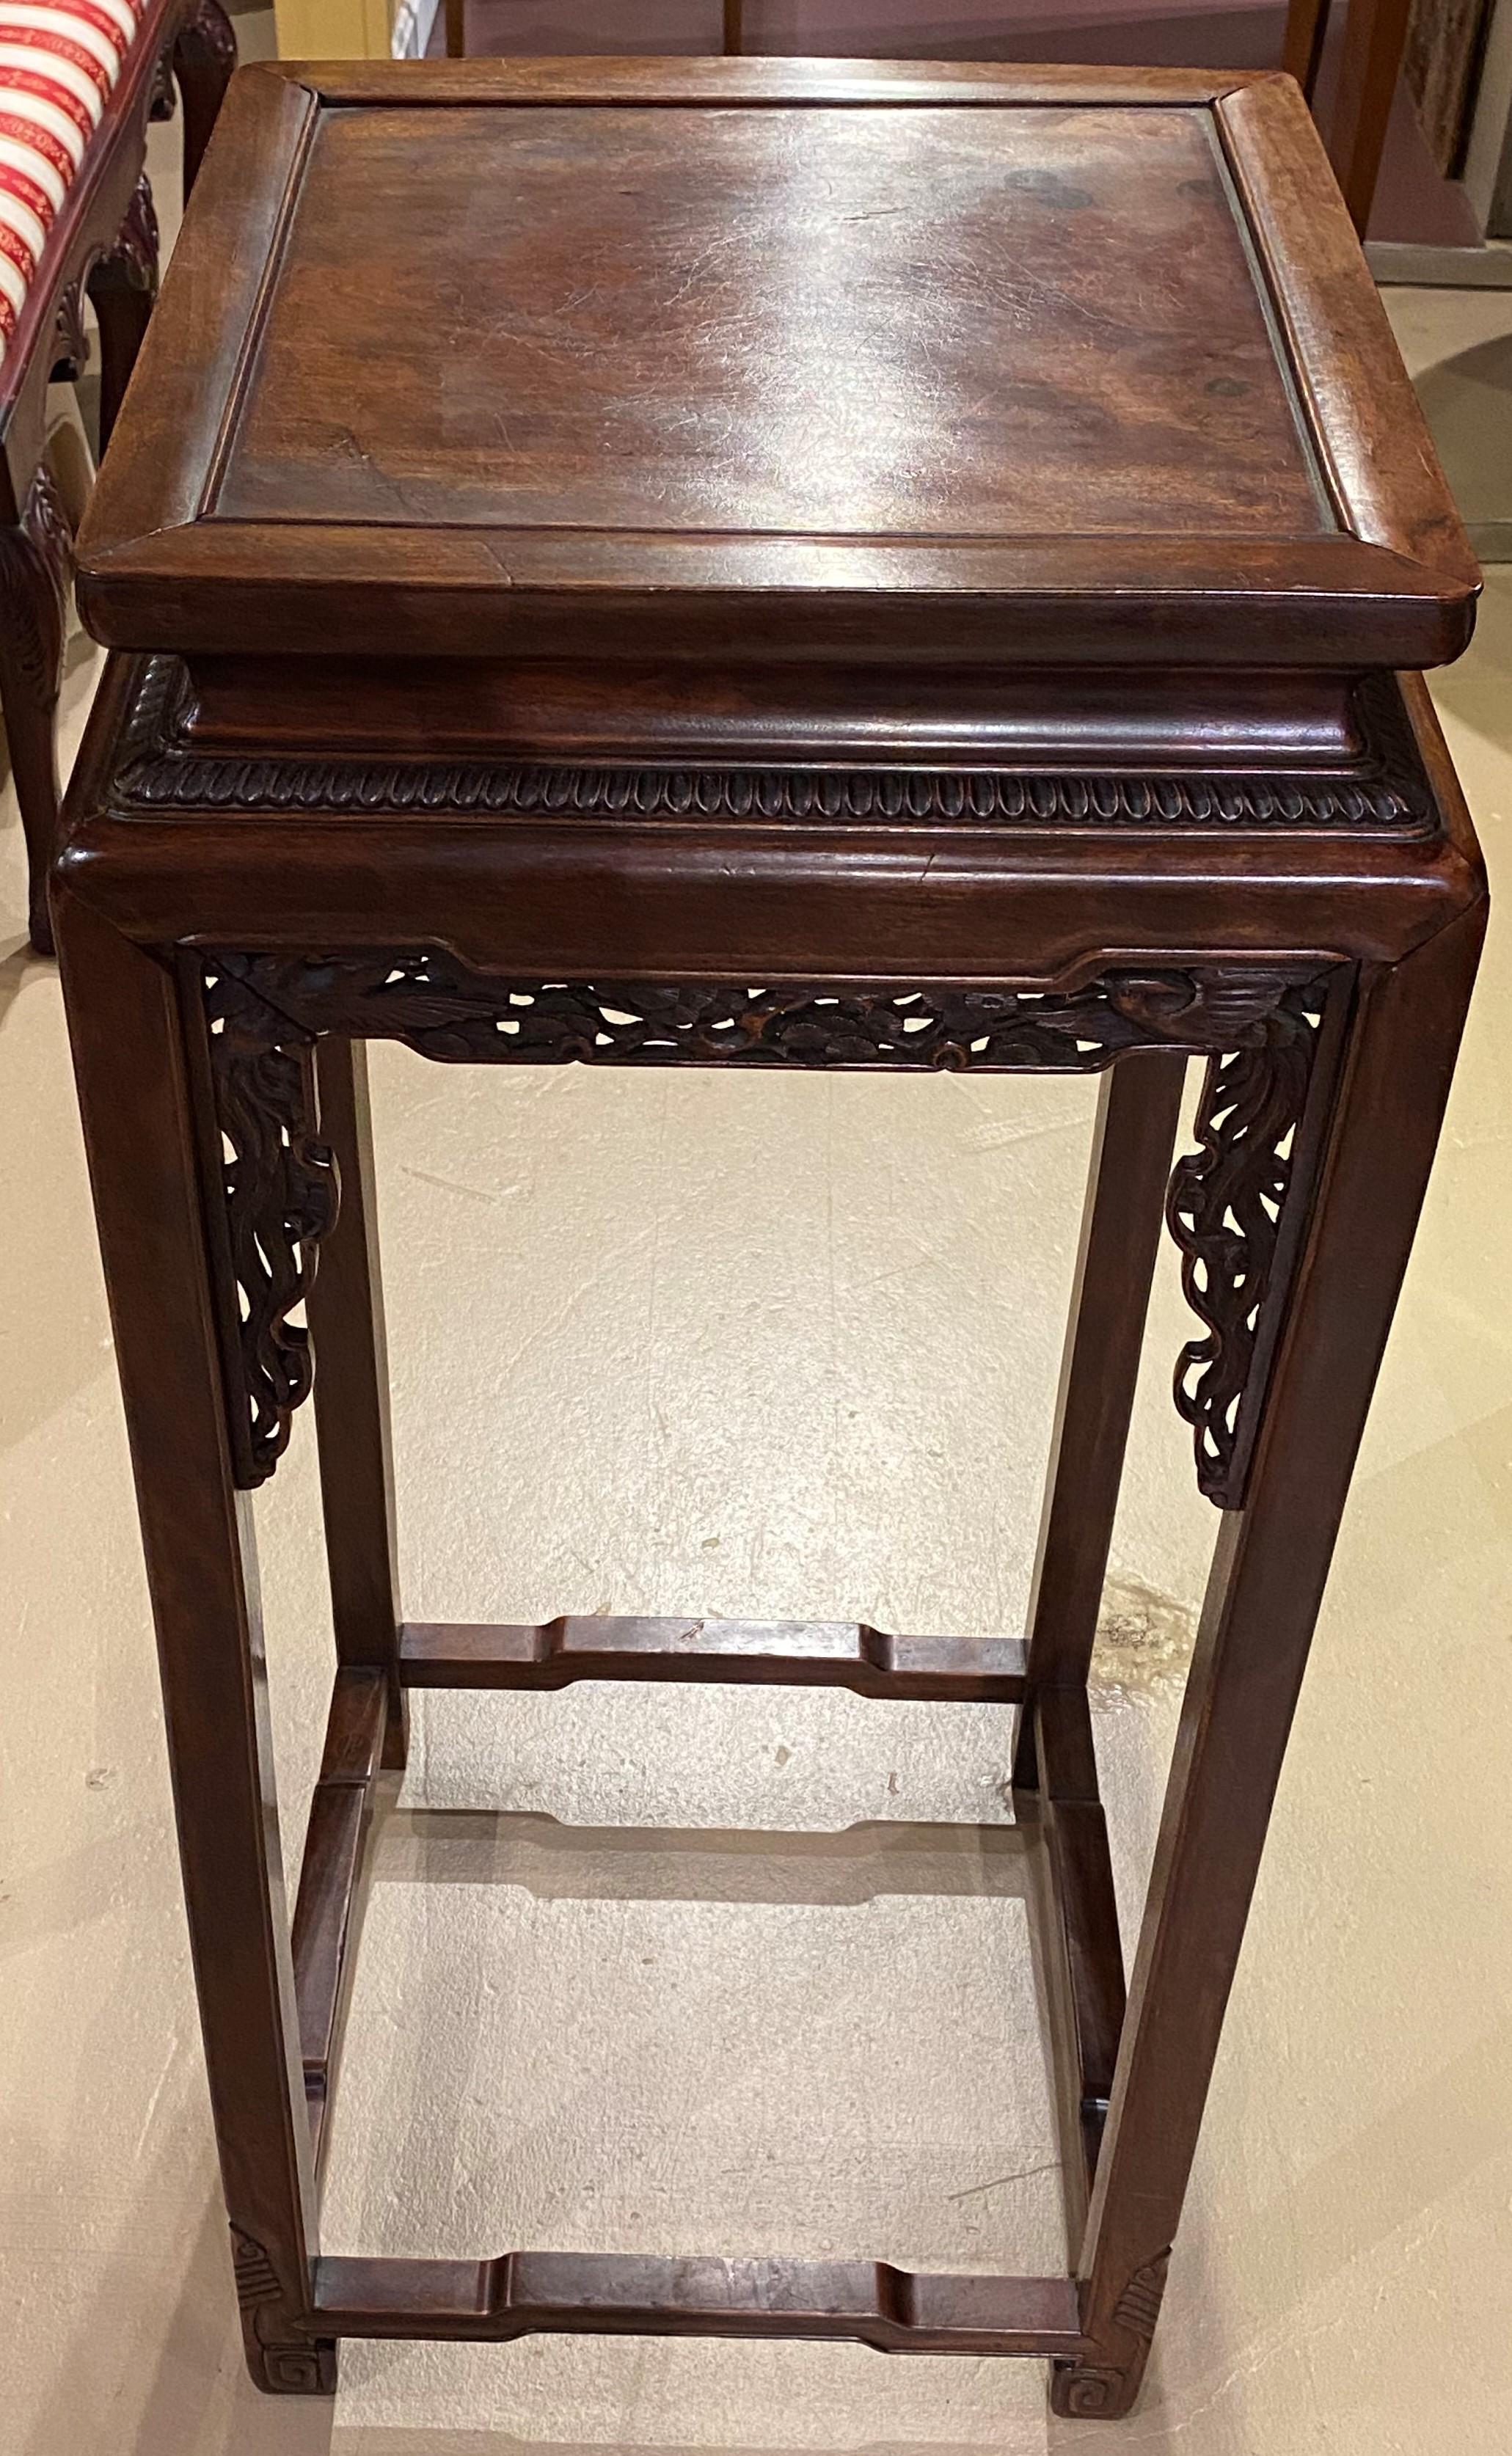 A fine tall Chinese hardwood square side table with subtle pierce carved bird and foliate decoration, dating to the early 20th century in very good overall condition, with some slight shrinkage, minor top stains and imperfections, as well as light